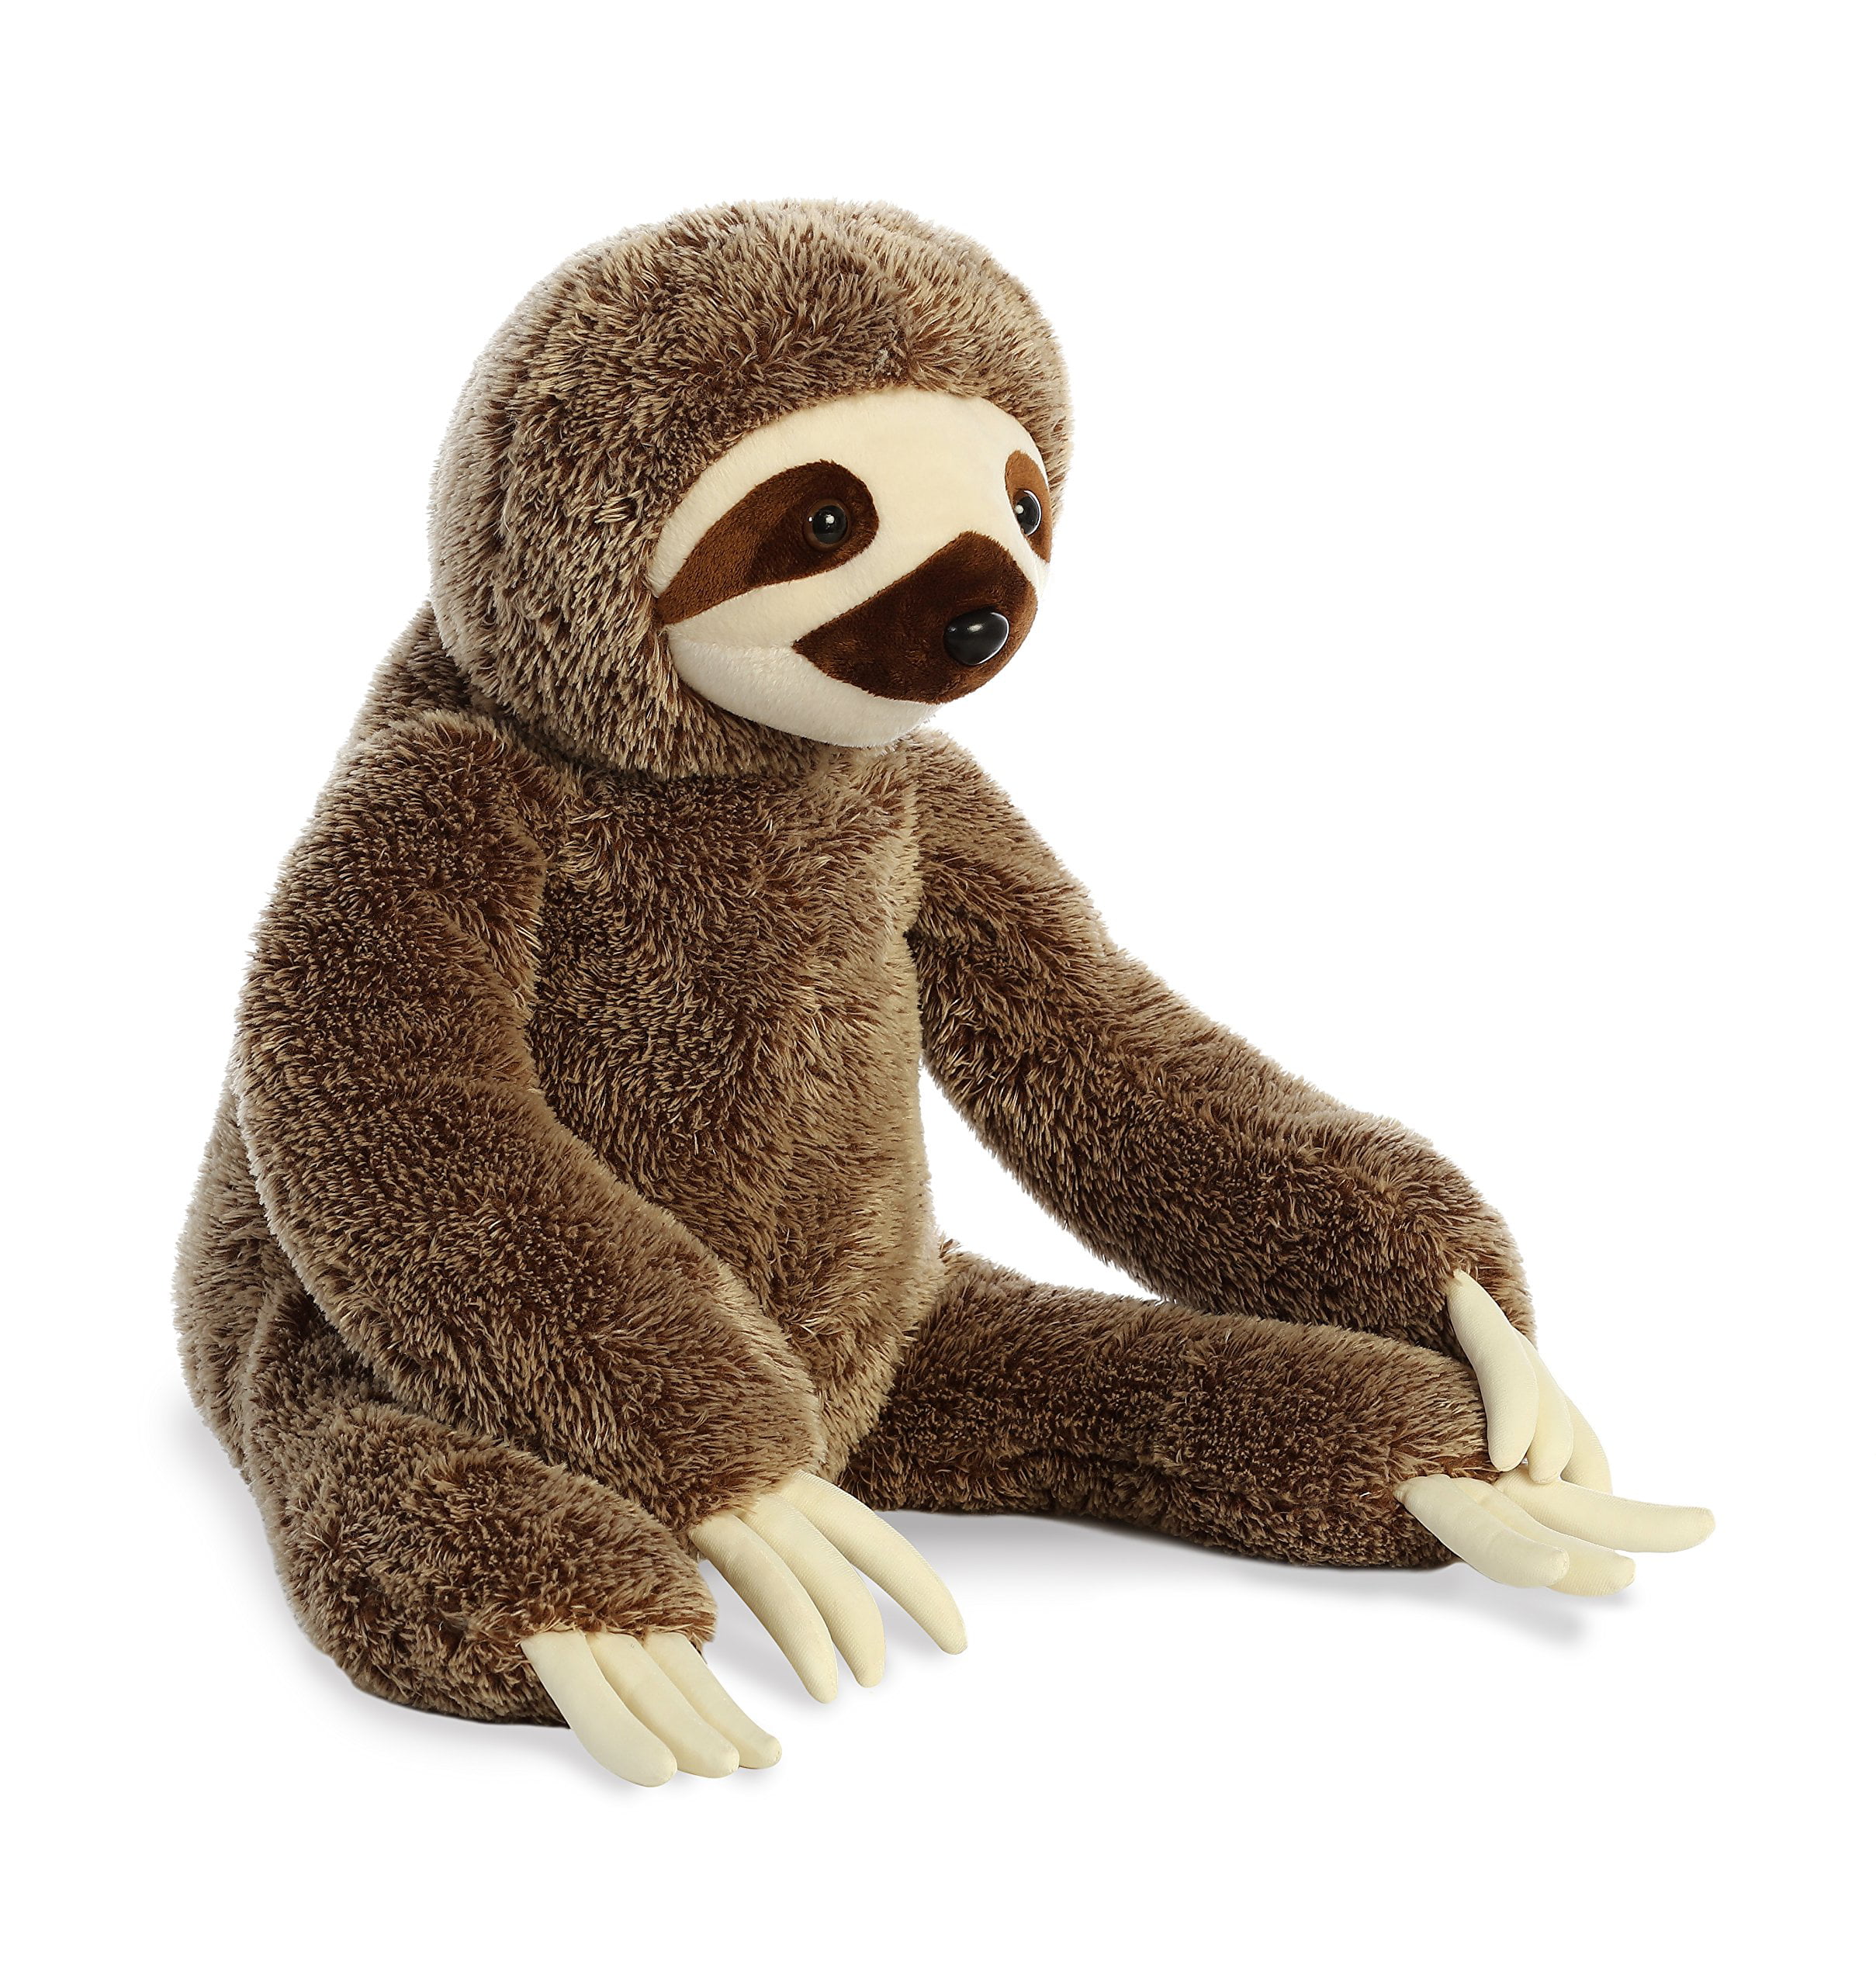 11 Inch Three Toed Sloth Plush Stuffed Animal by Aurora for sale online 